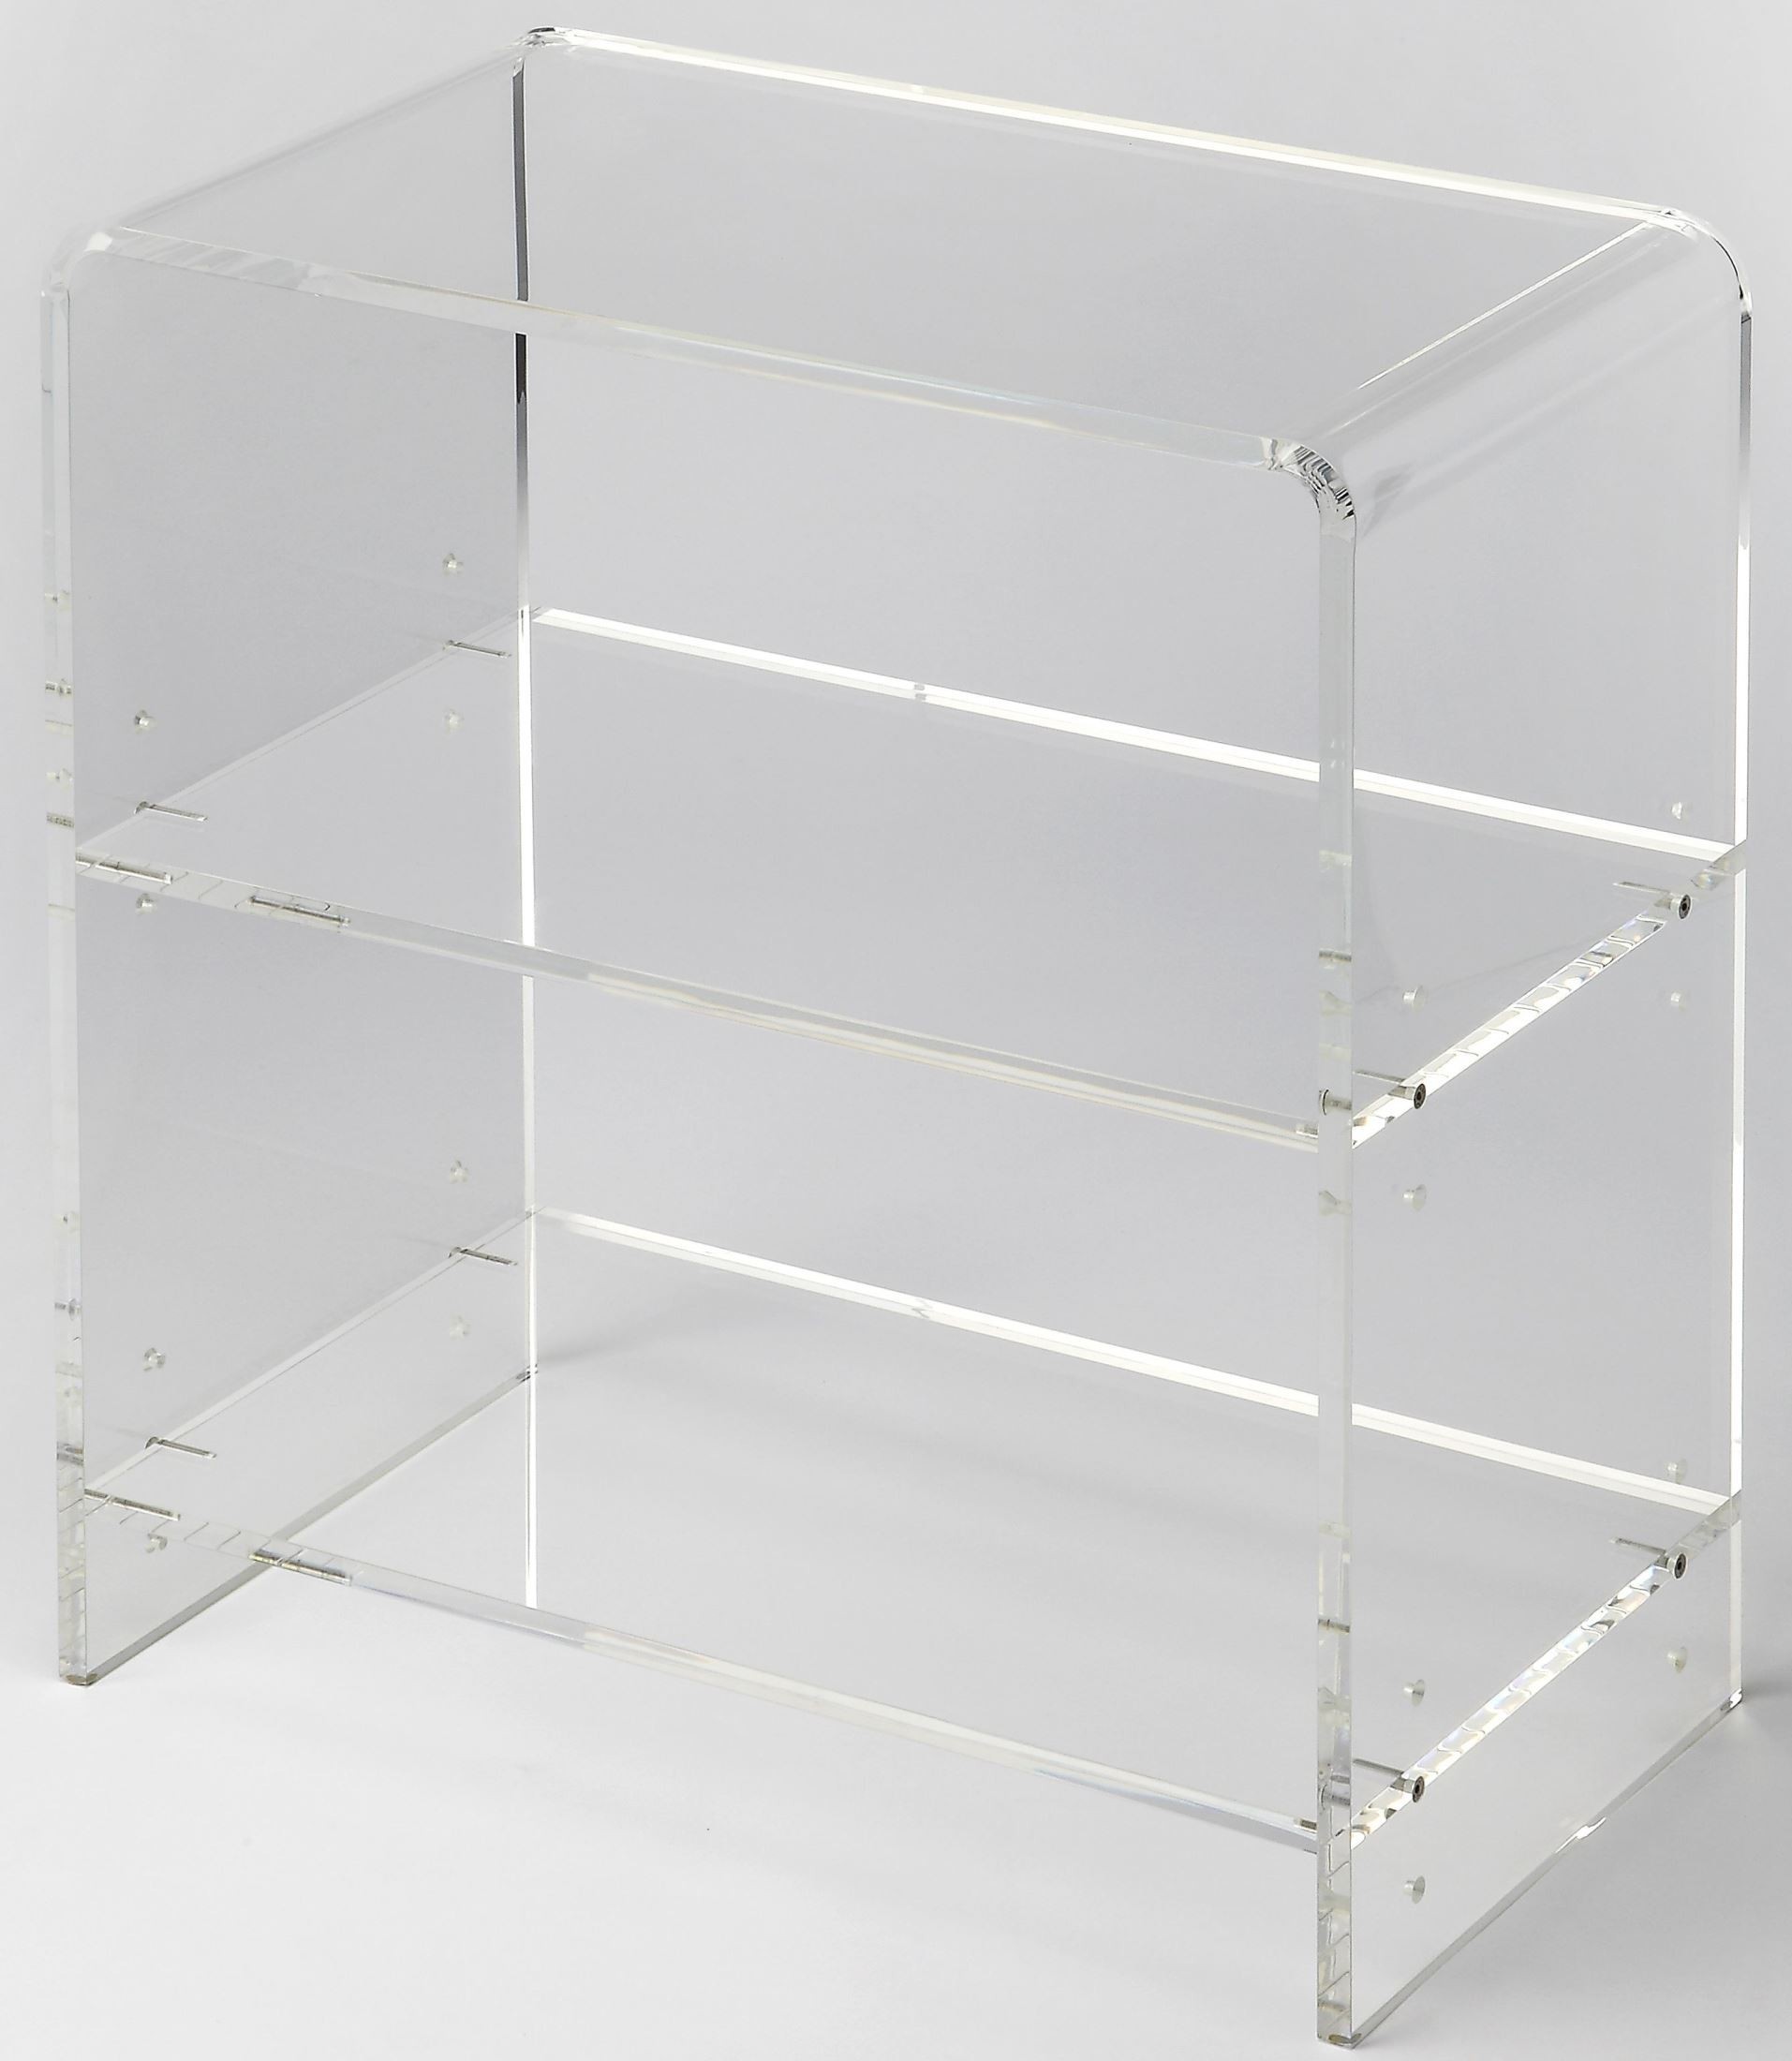 Crystal clear acrylic bookcase from butler coleman furniture